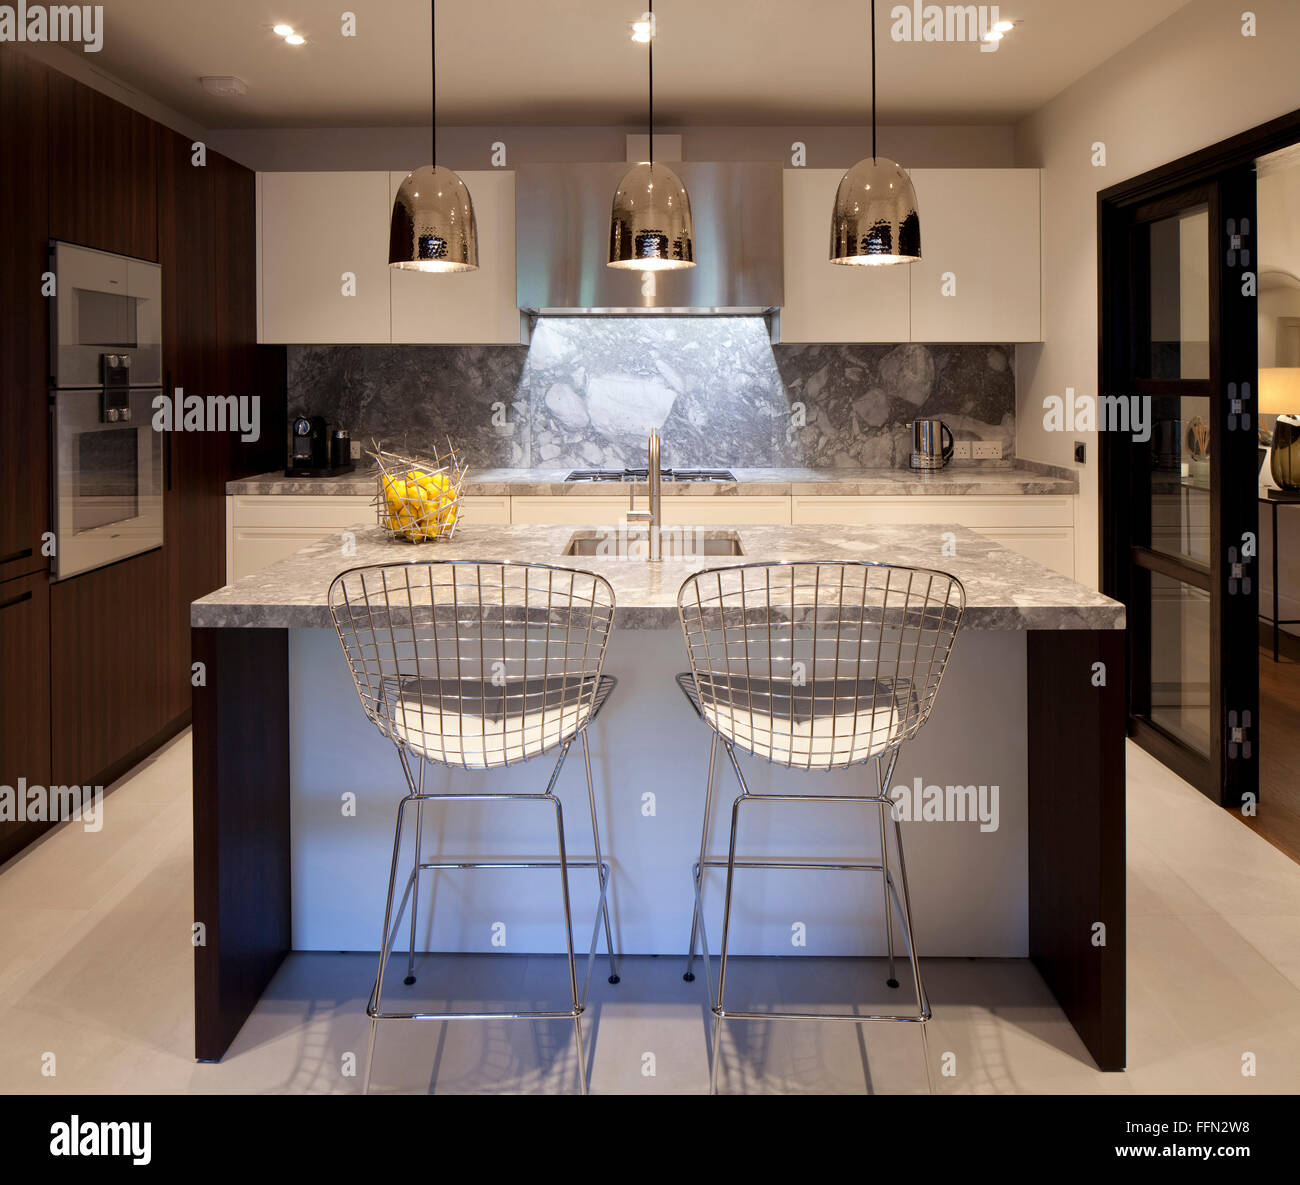 Knightsbridge Apartment, London. The kitchen with dark wood cupboards and white surfaces. Stock Photo